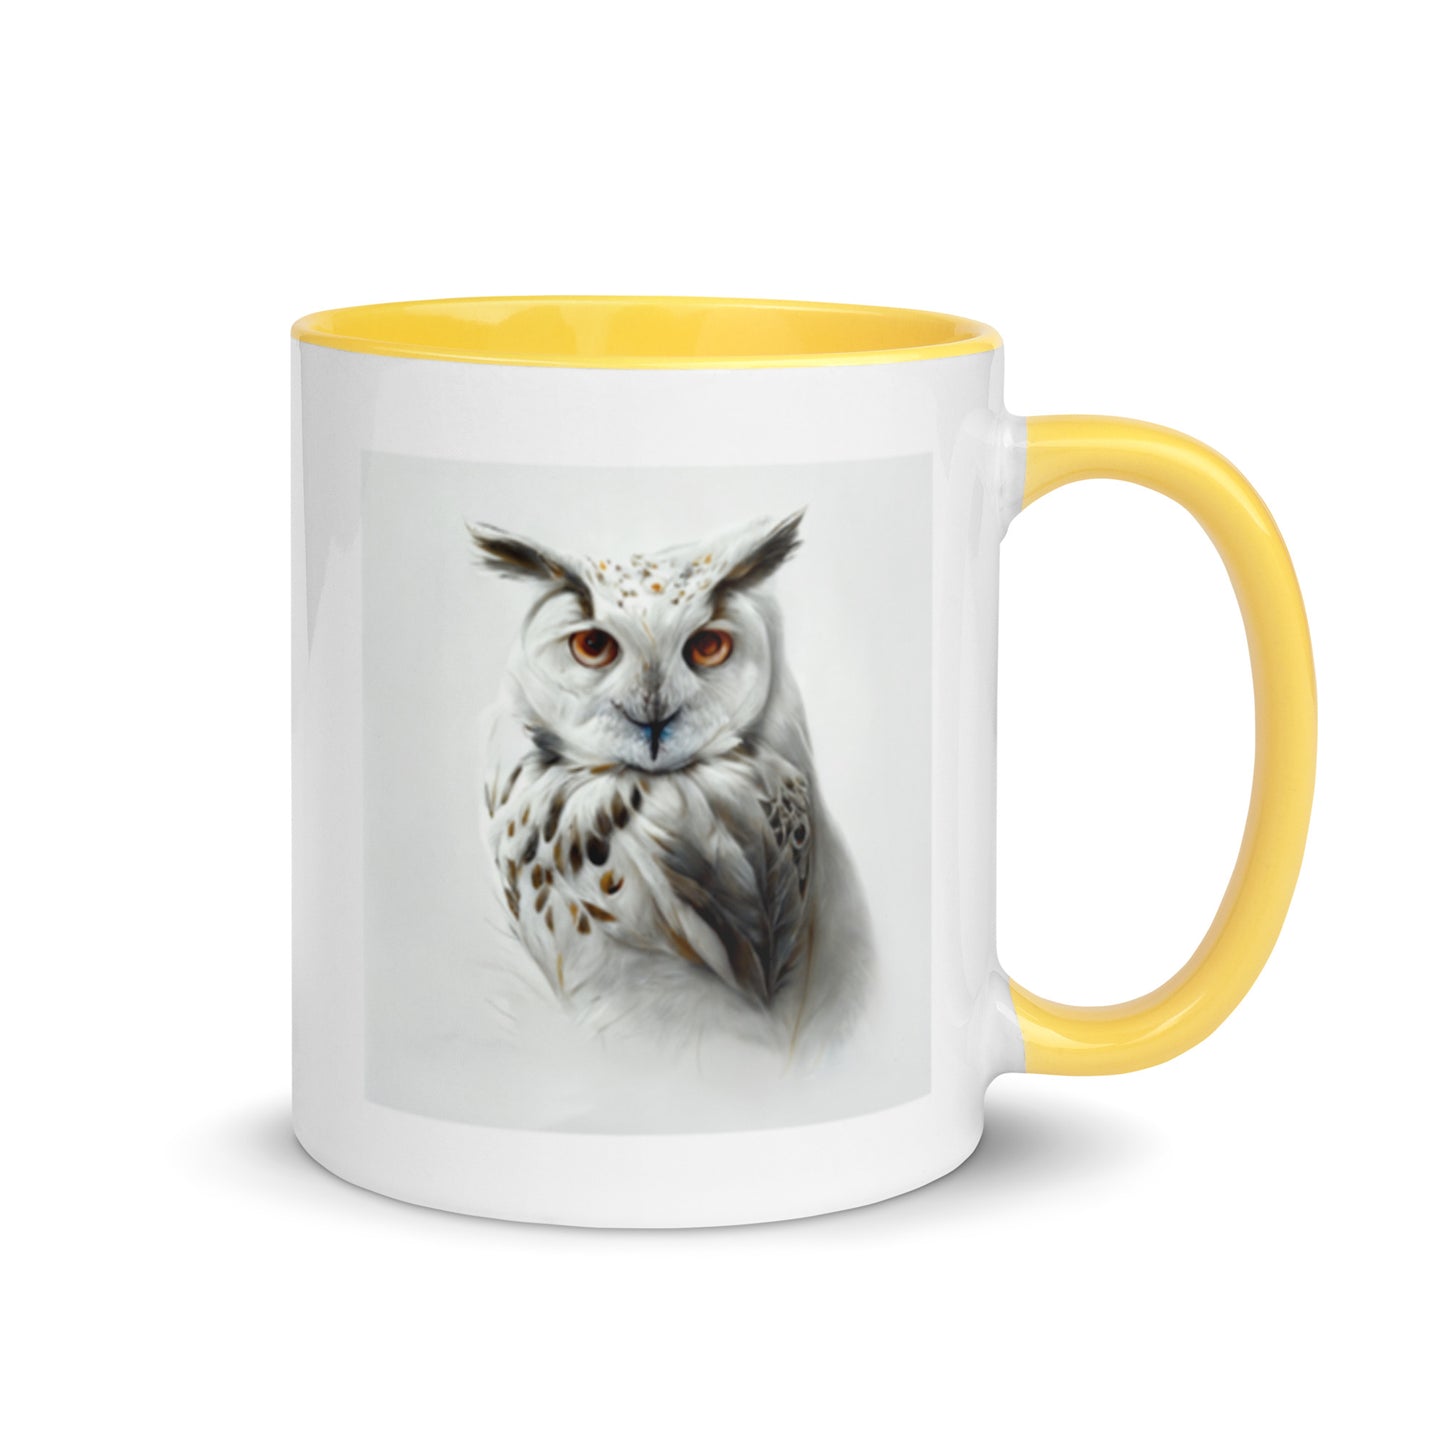 Owl Design -Themed Colour-Inside-Cup: A Unique and Stylish Mug for Every Occasion